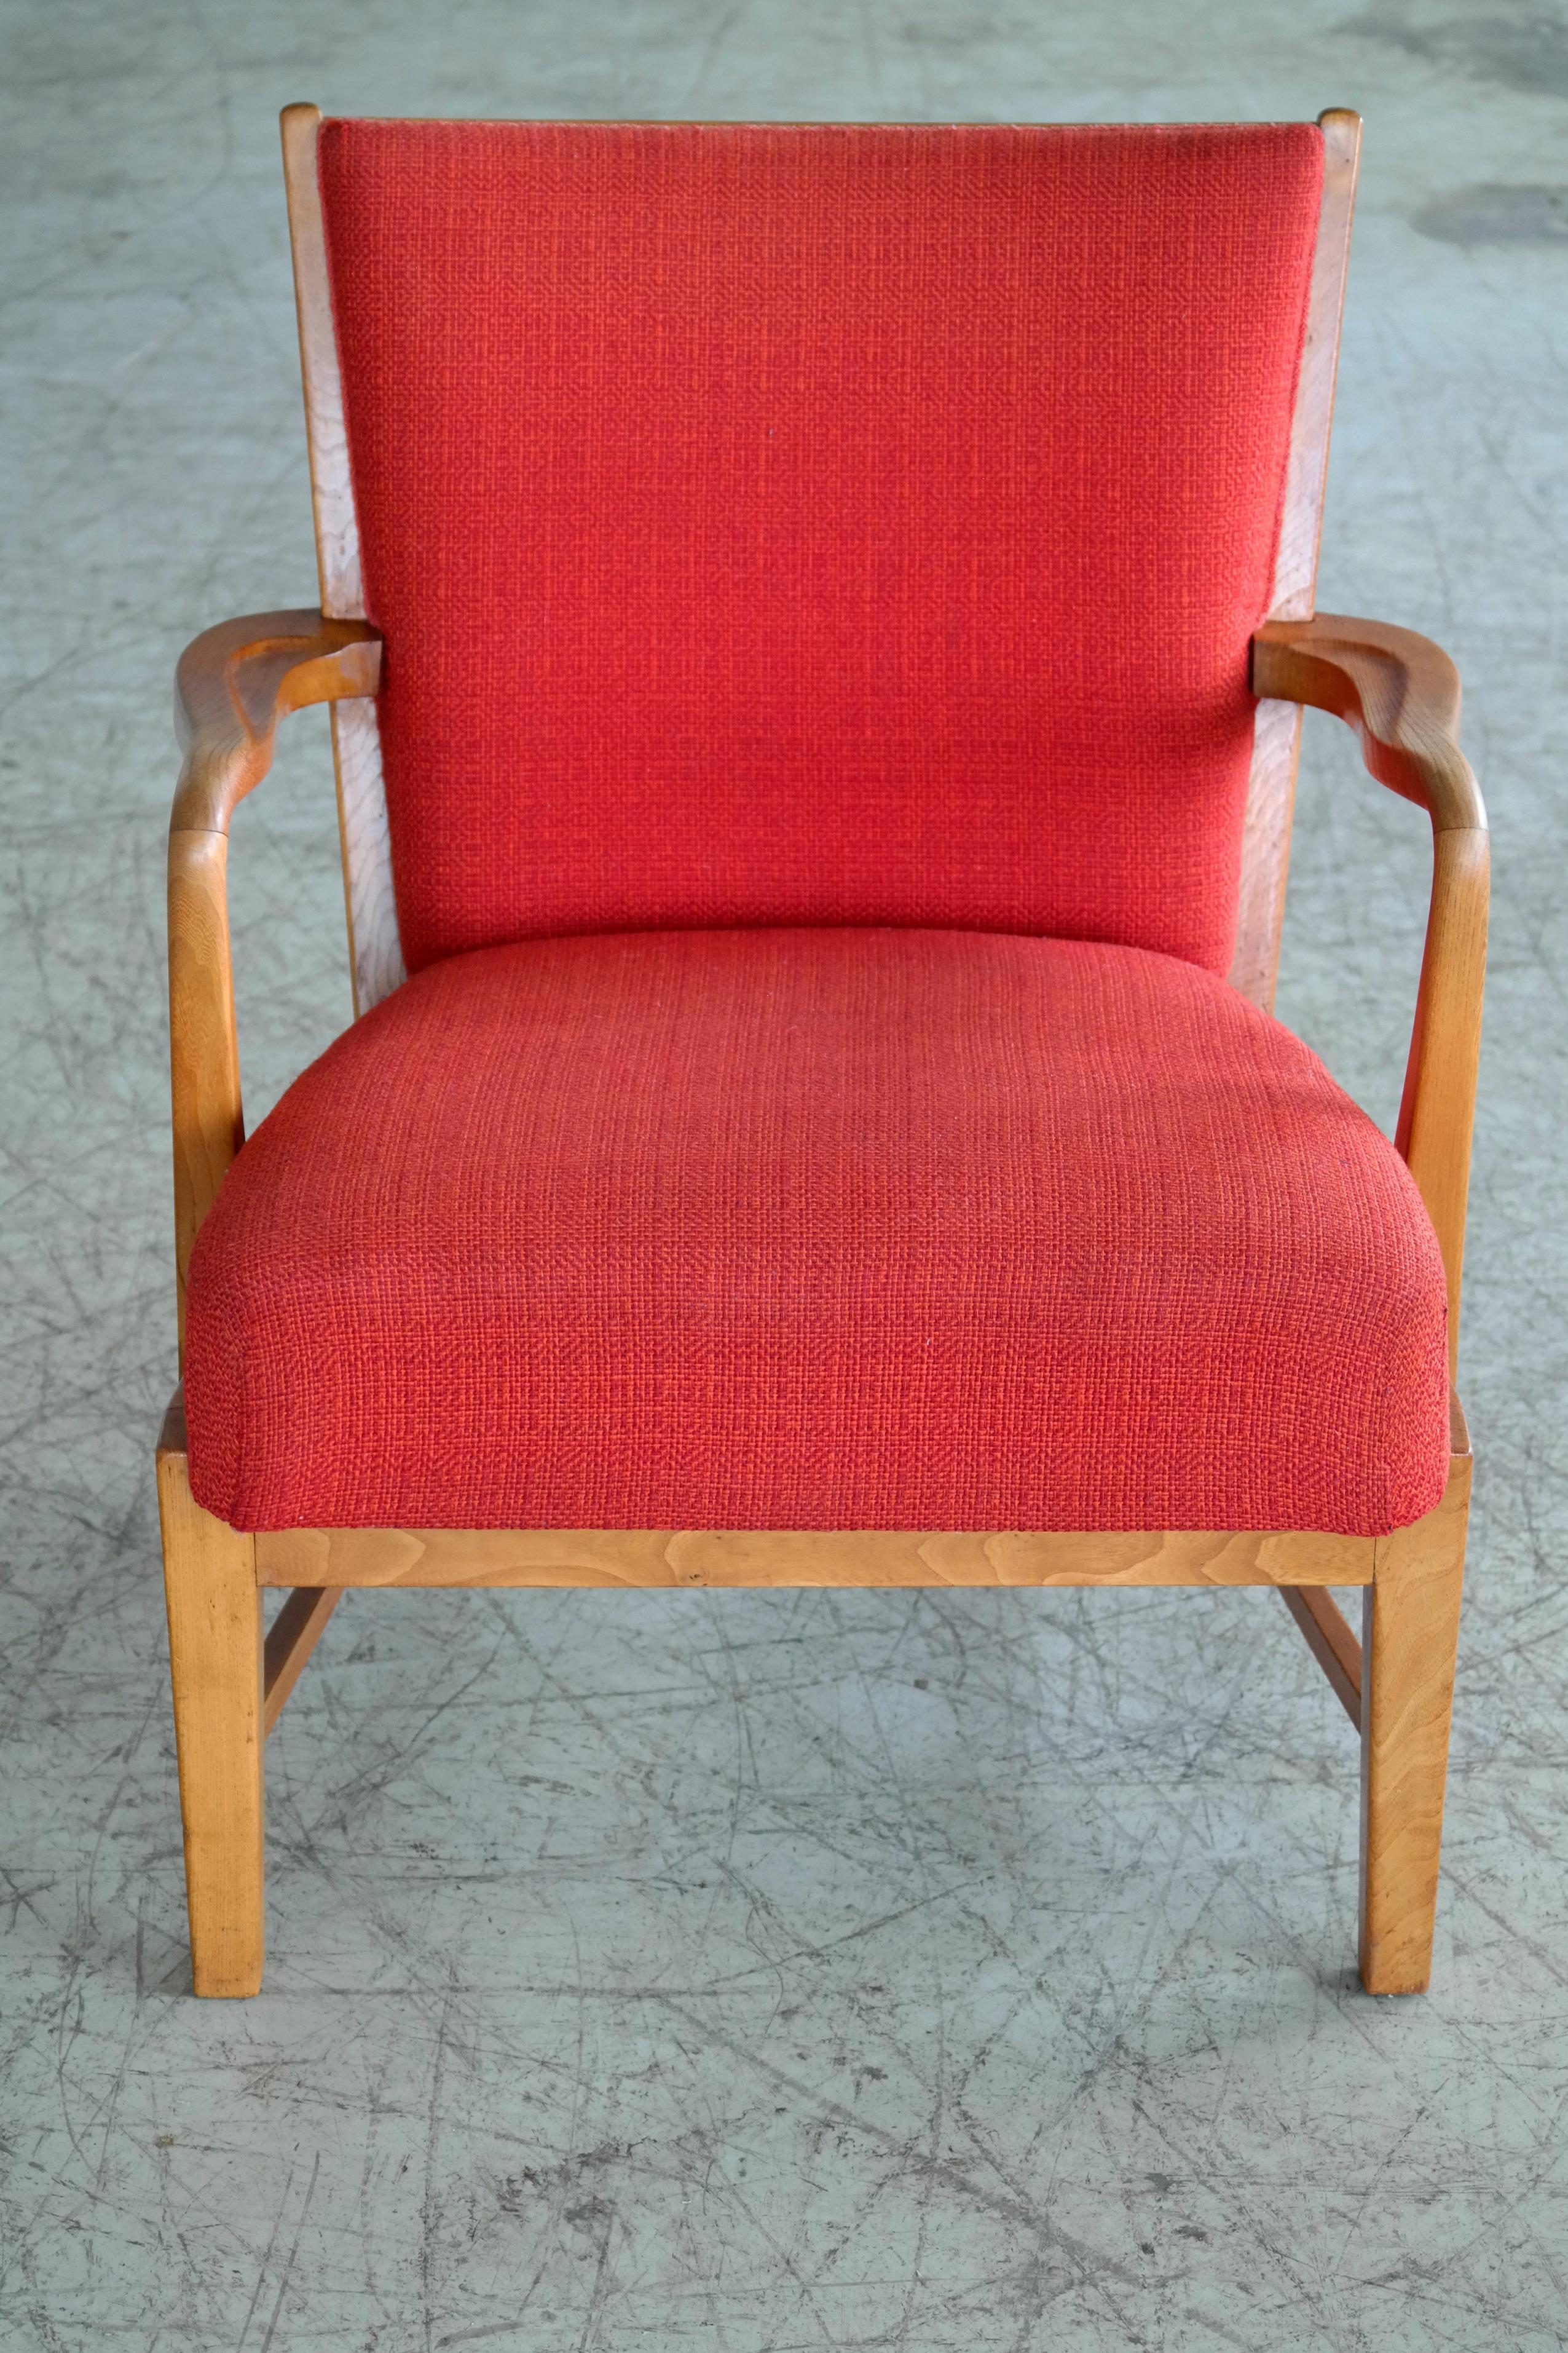 Mid-20th Century Fritz Hansen Lounge Chair in Oak and Wool with Solid Oak Back Danish Midcentury